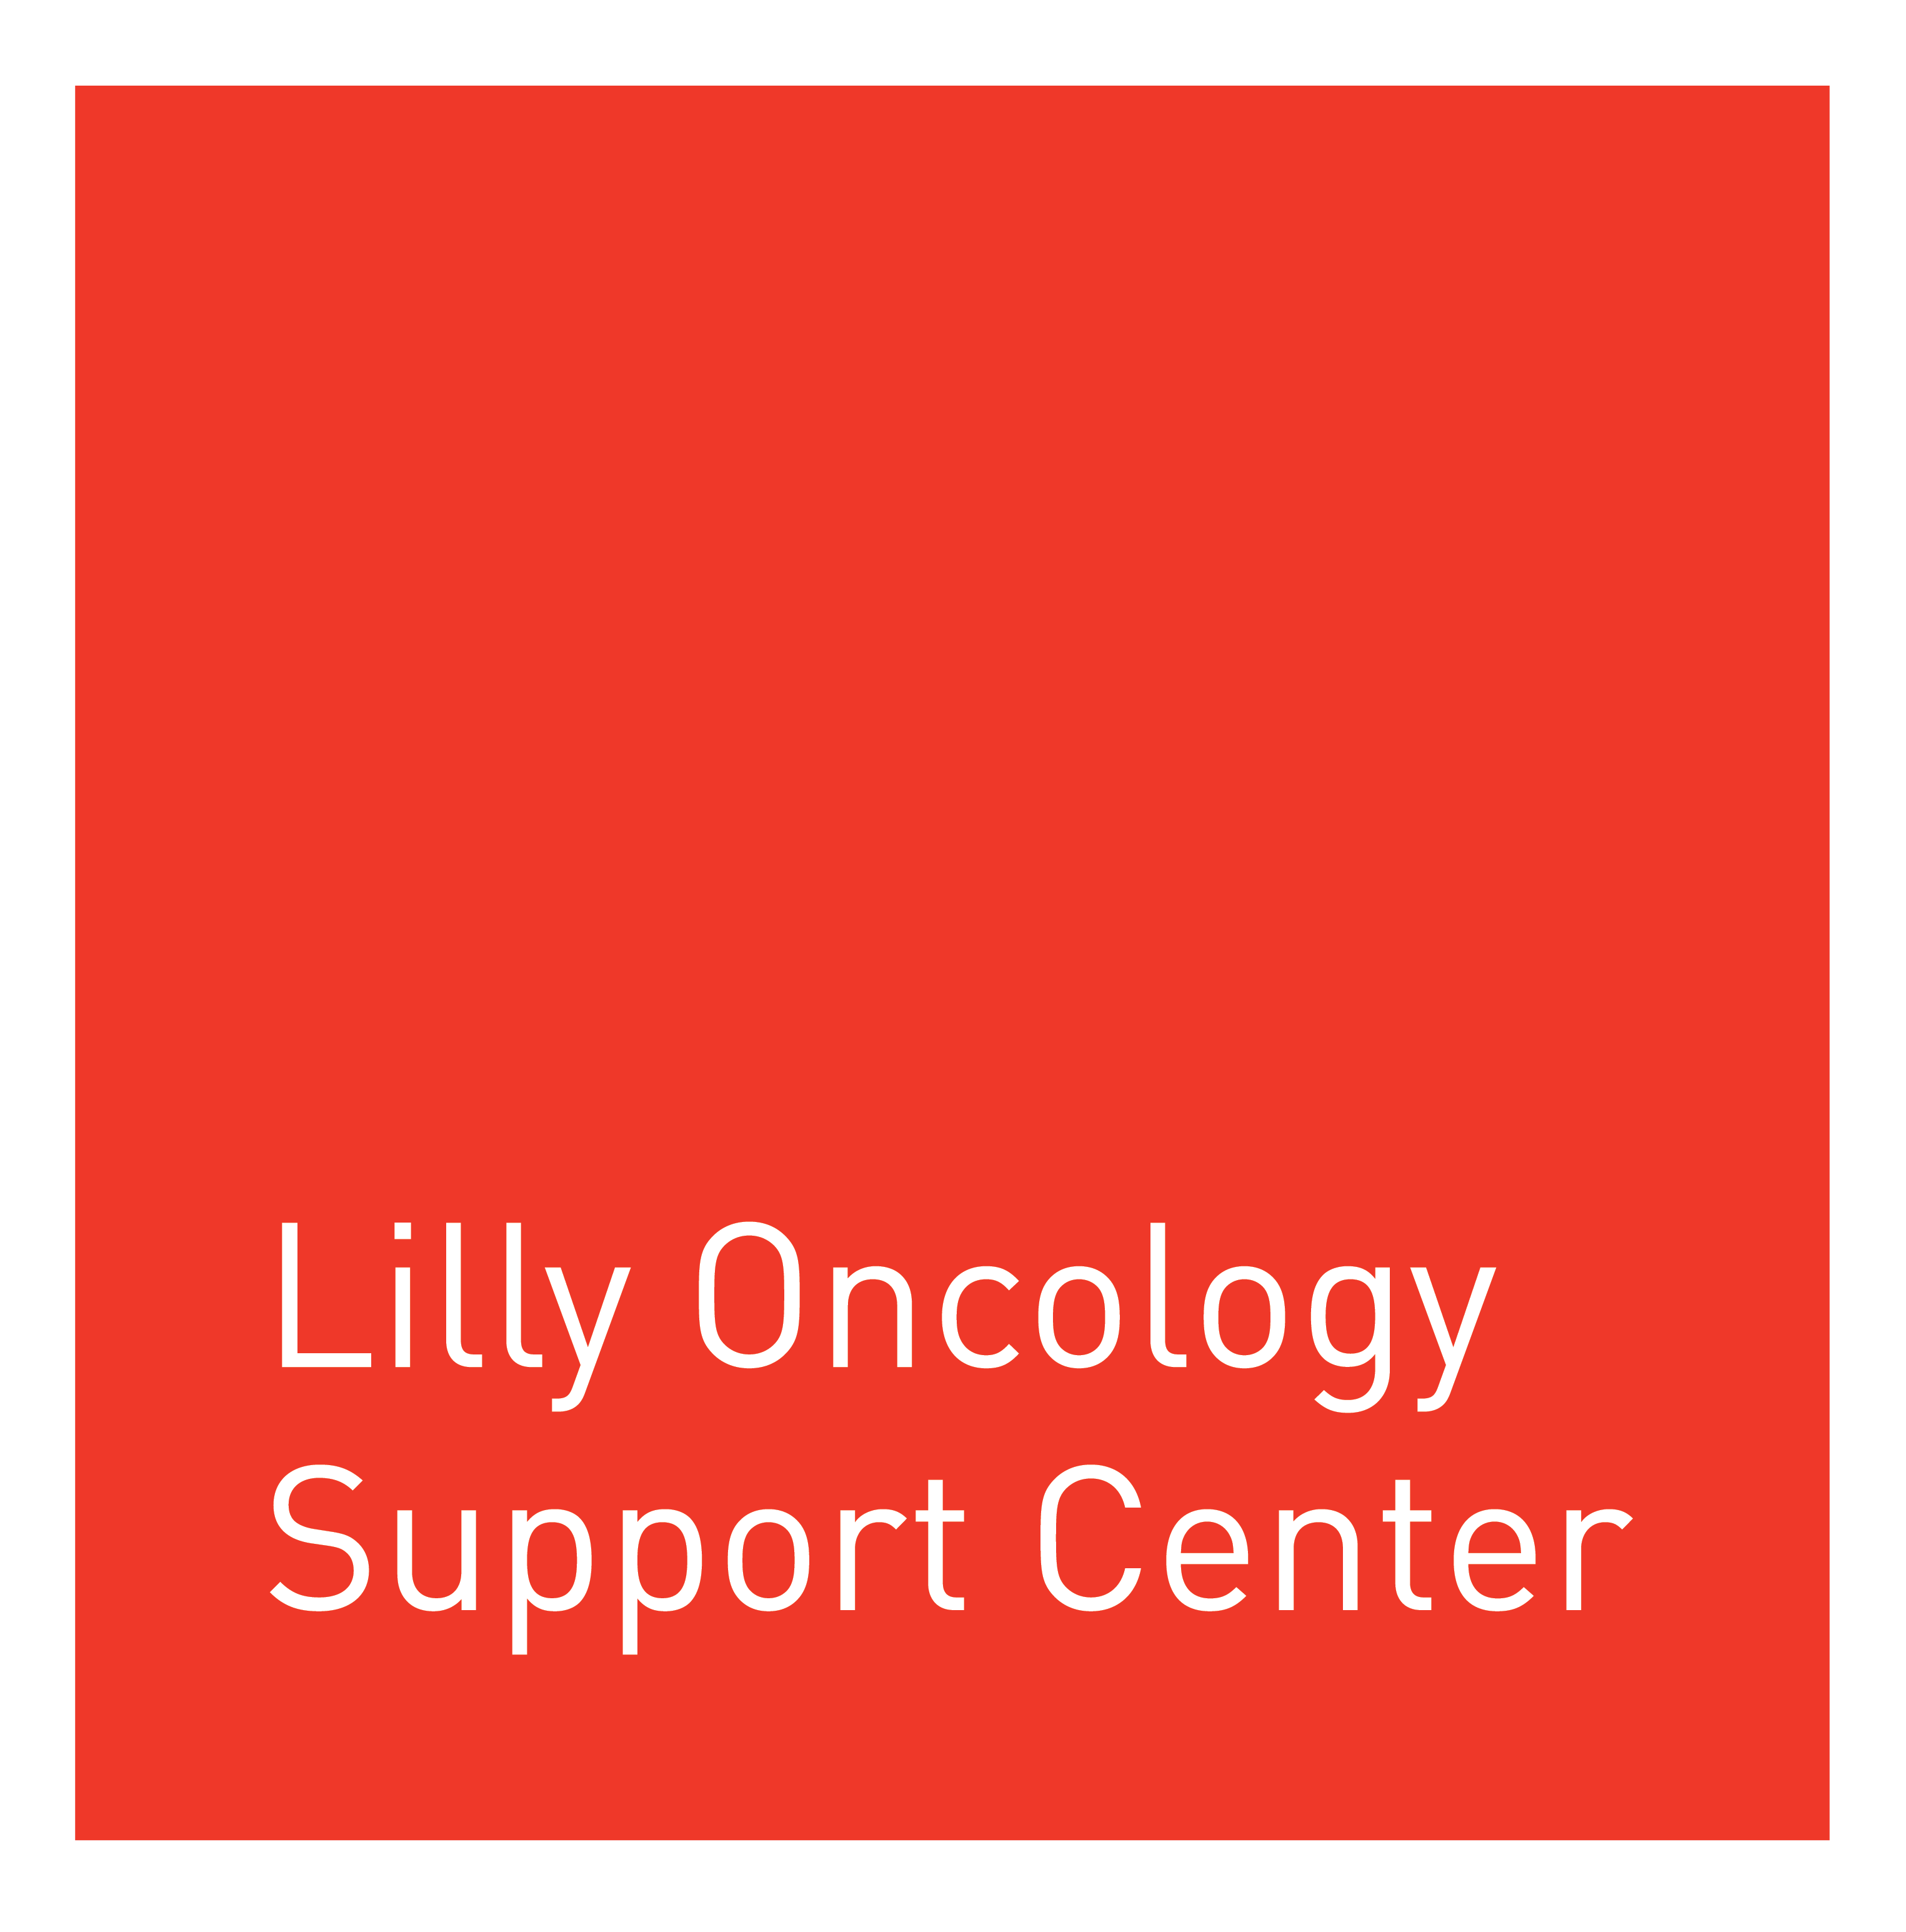 lilly oncology support center